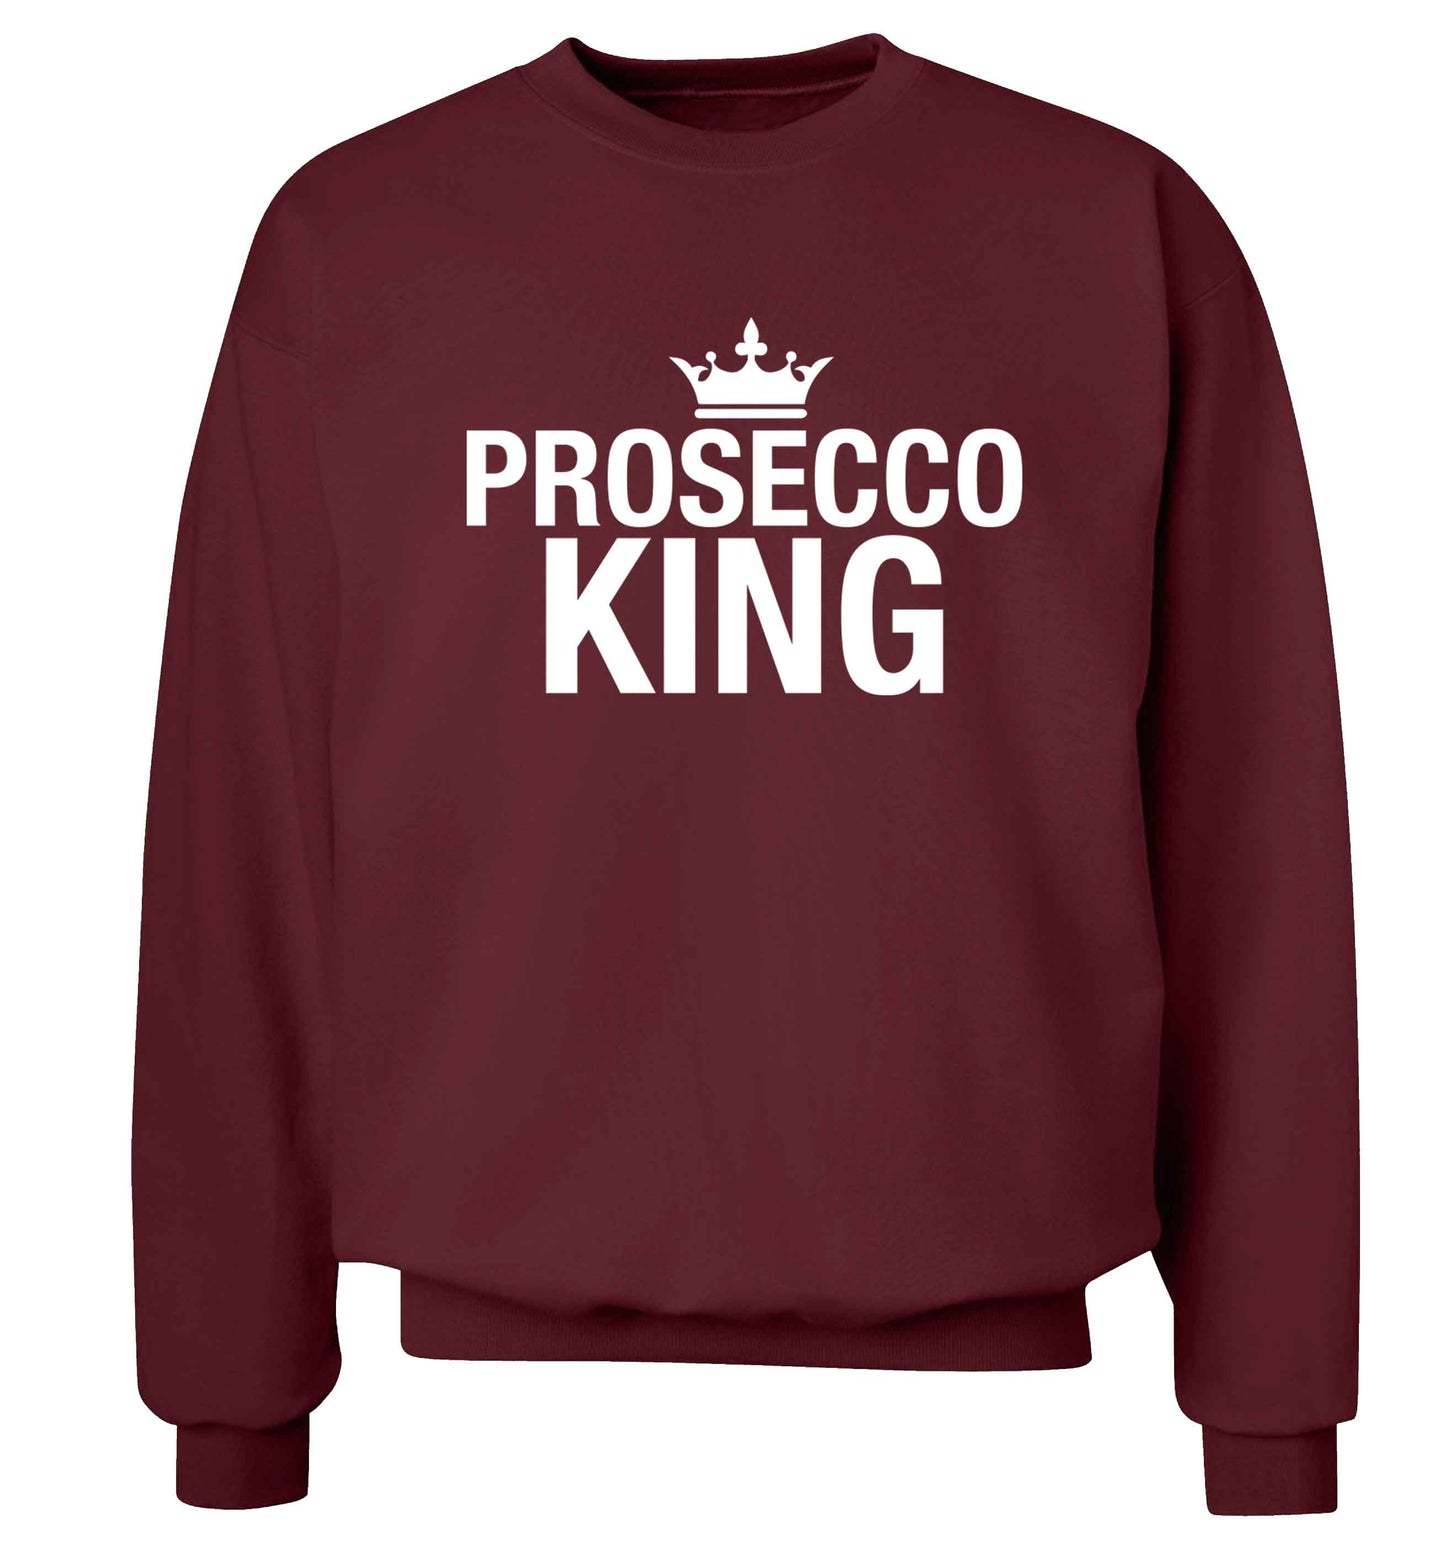 Prosecco king Adult's unisex maroon Sweater 2XL